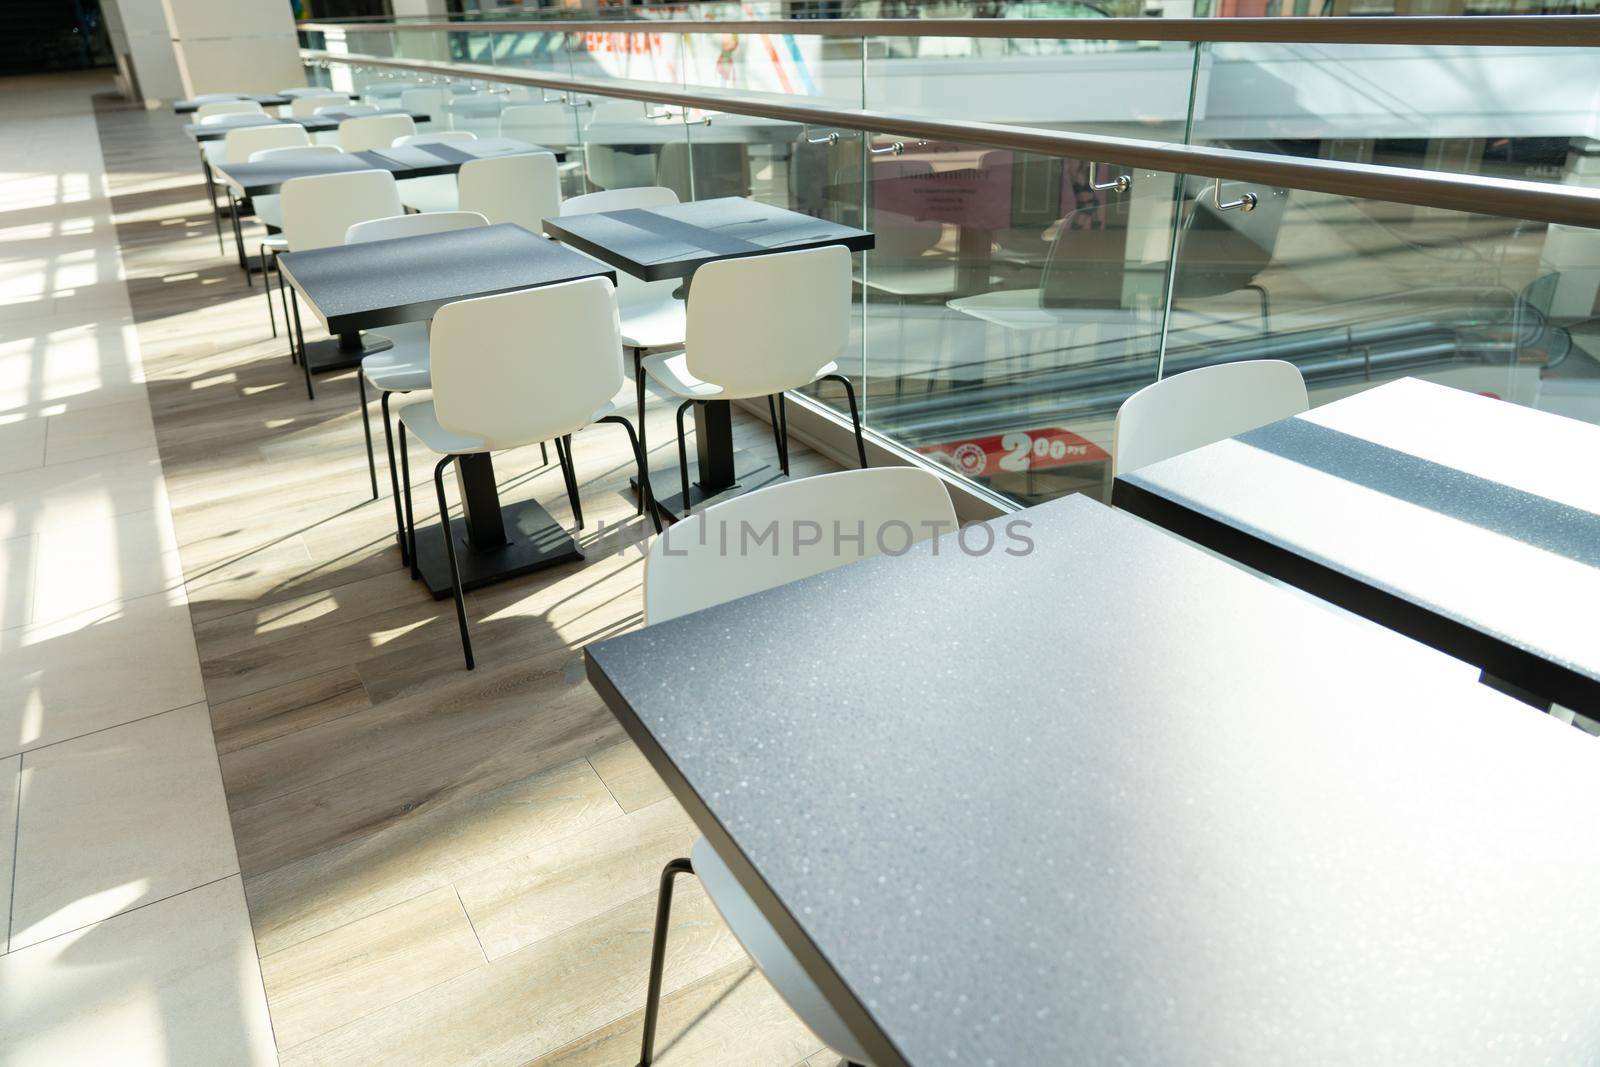 A row of tables with white chairs for visitors to the food court of a modern shopping center. People admire the beautiful view during the meal.